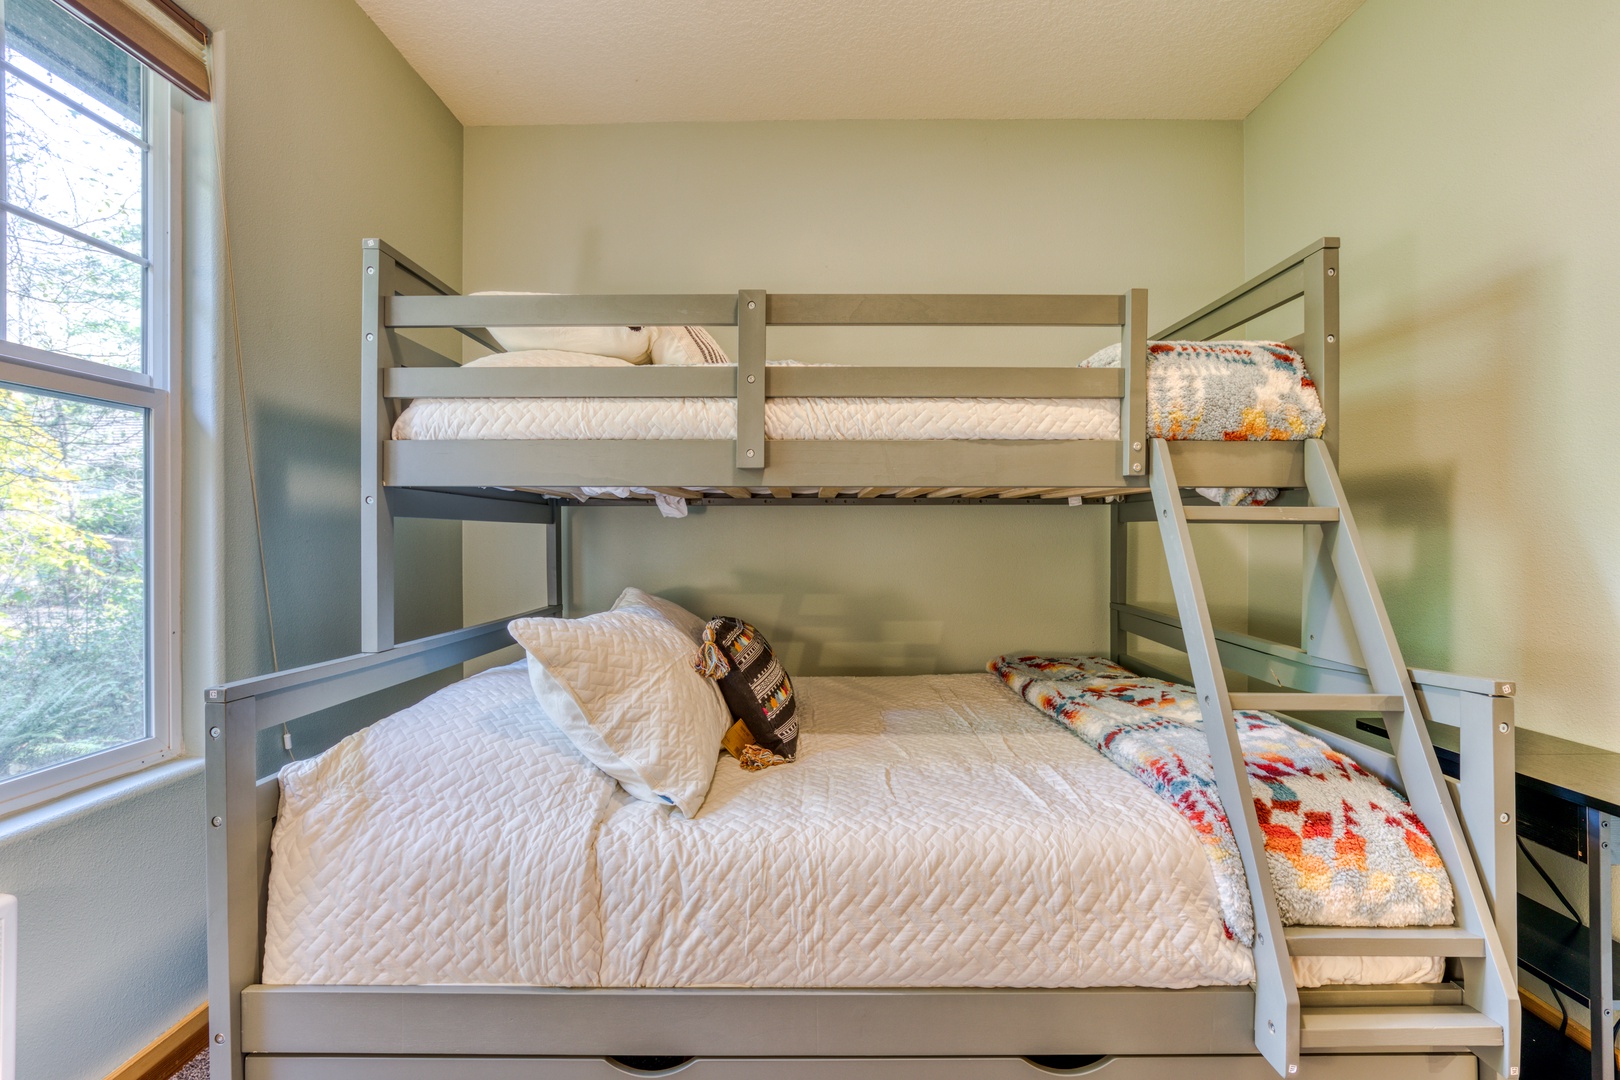 Brightwood Vacation Rentals, Riverside Retreat - Get all of the kids together - This bunk bed sleeps 3